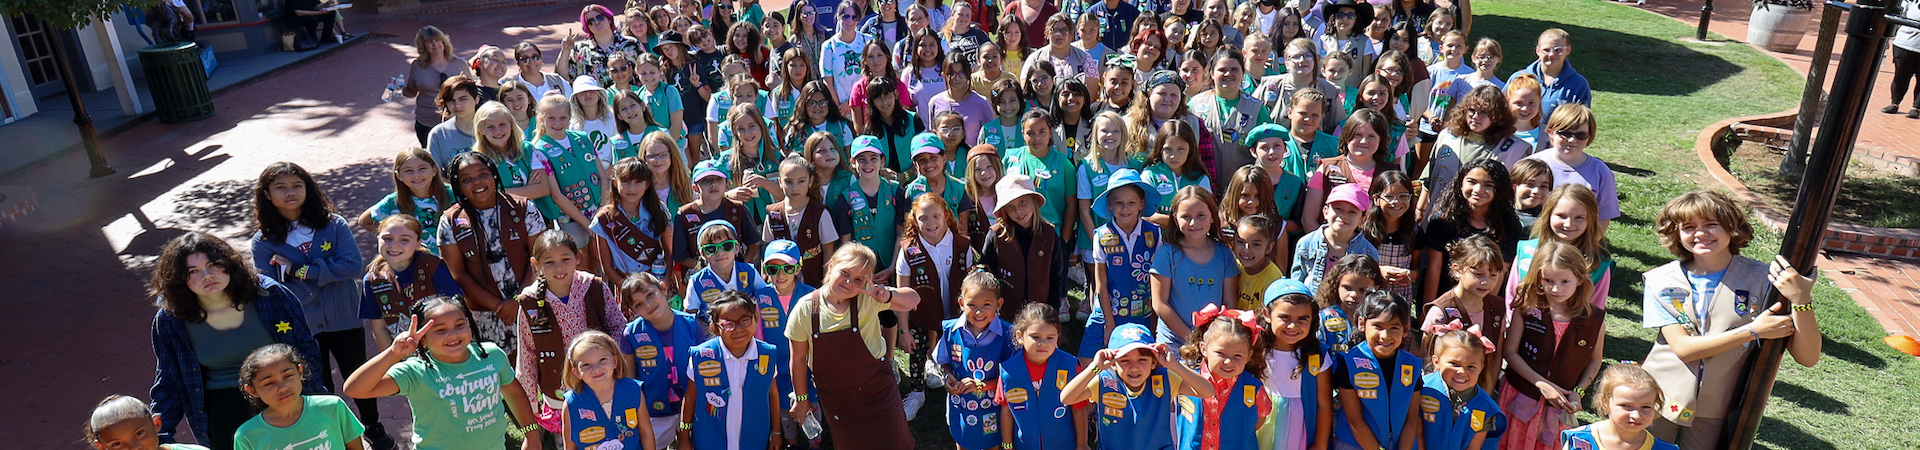  group photo of girl scouts from southern arizona at a council bridging event 